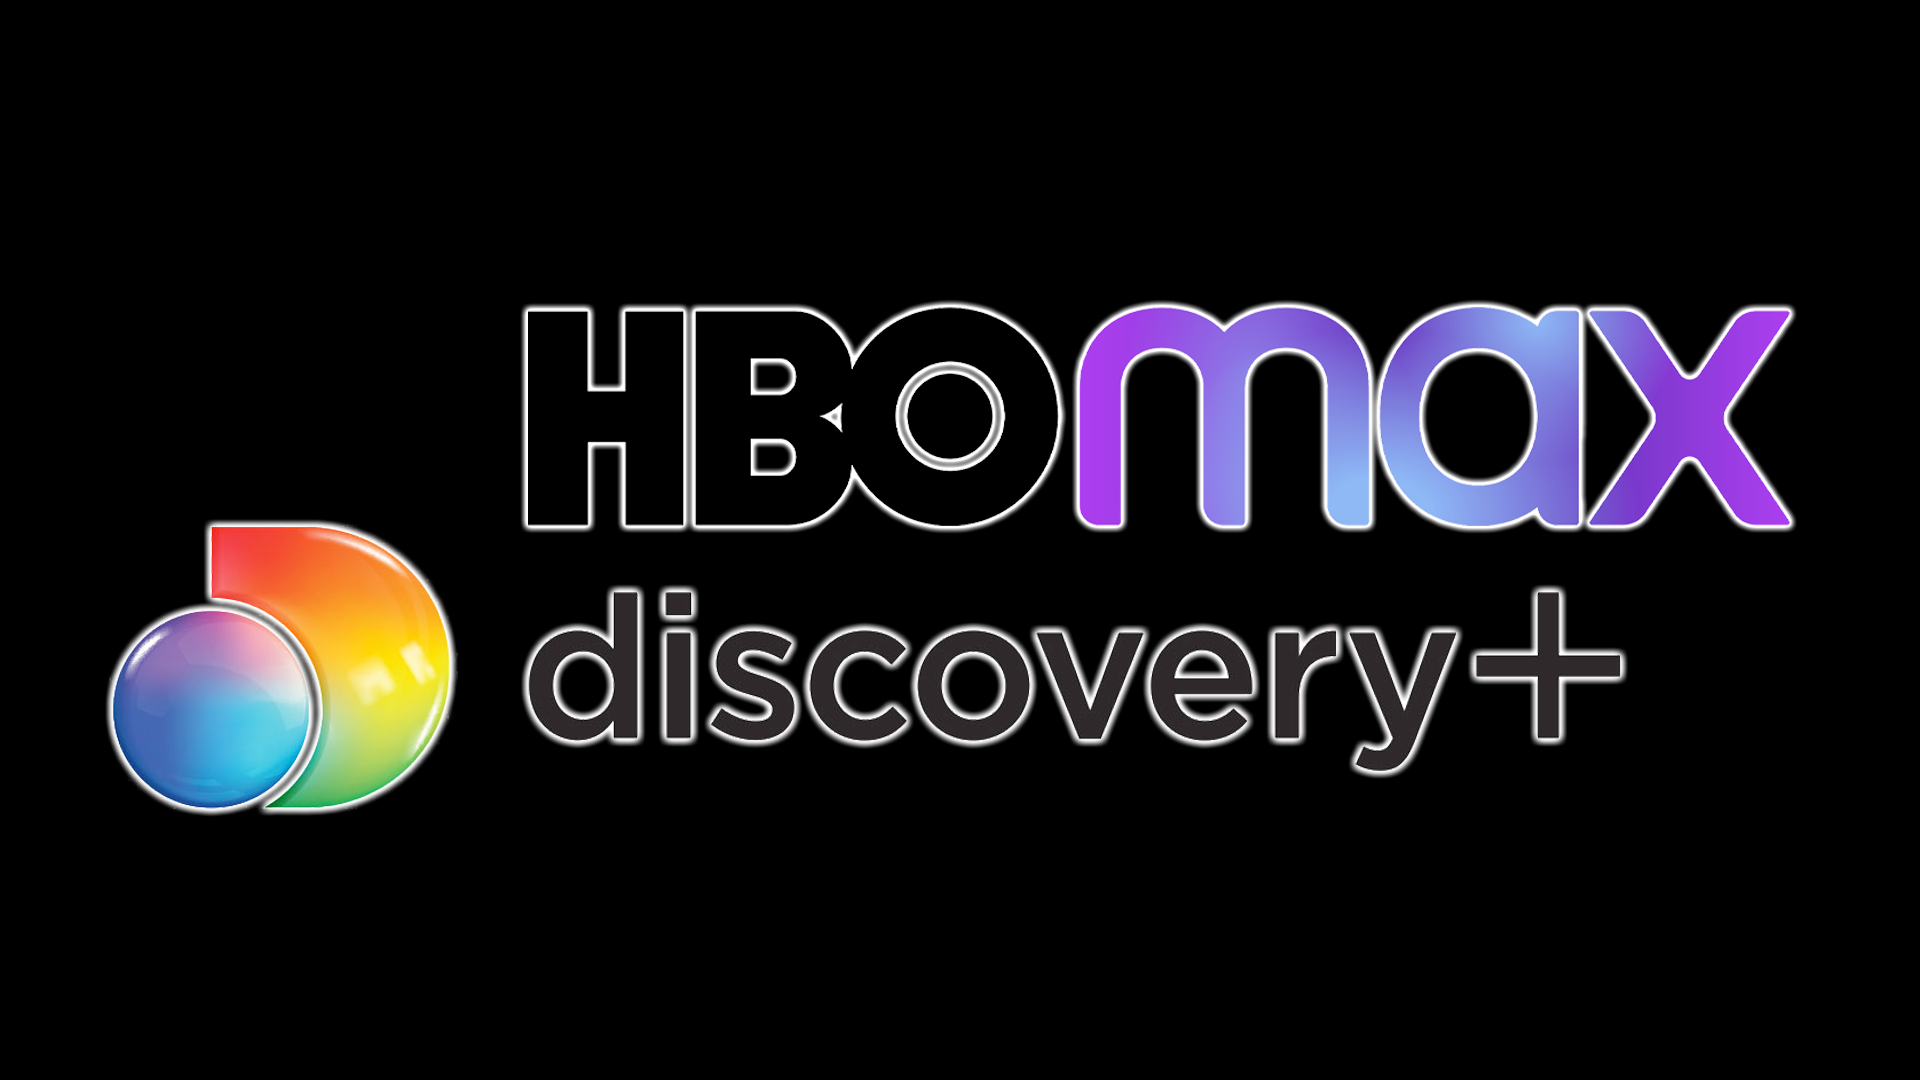 The HBO Max and Discovery+ logos.